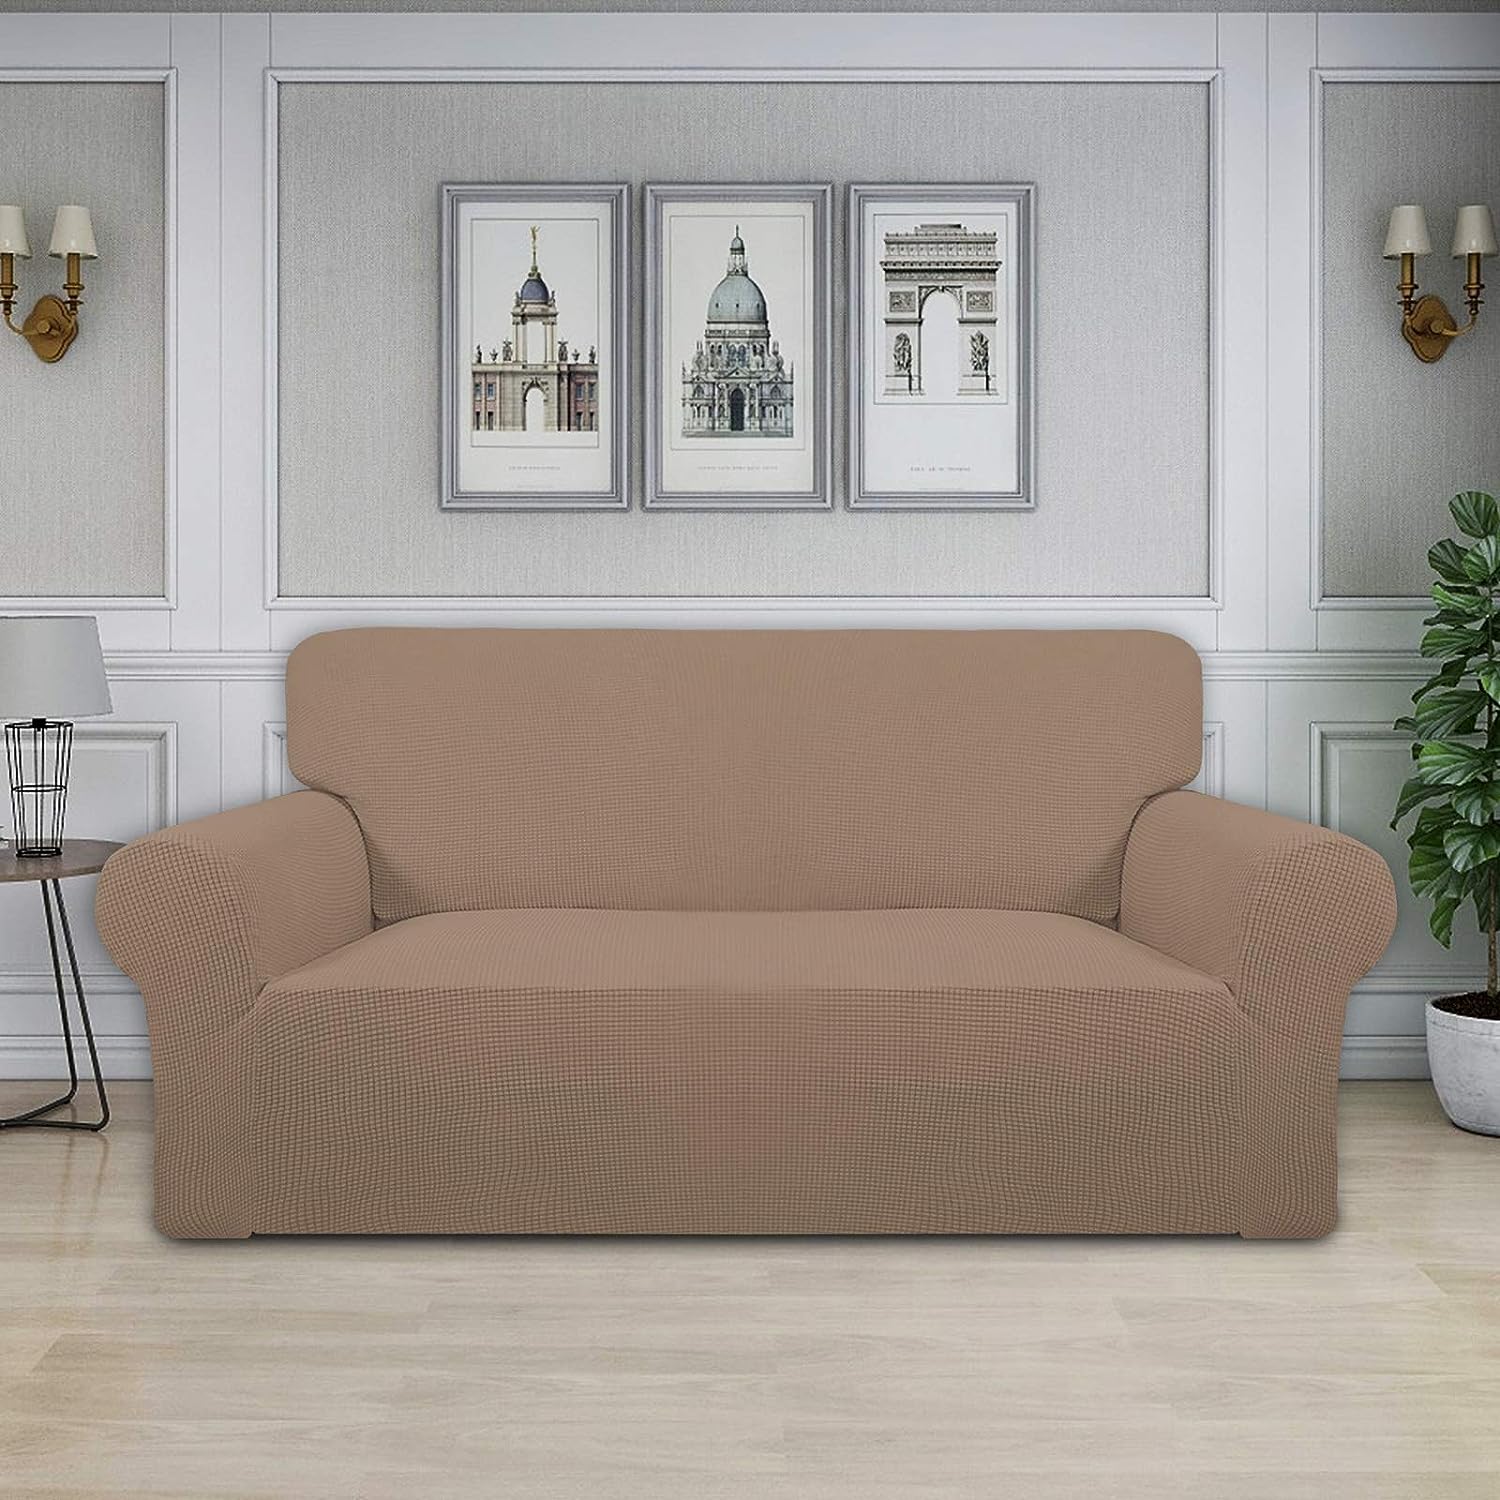 camel loveseat covers living room chair